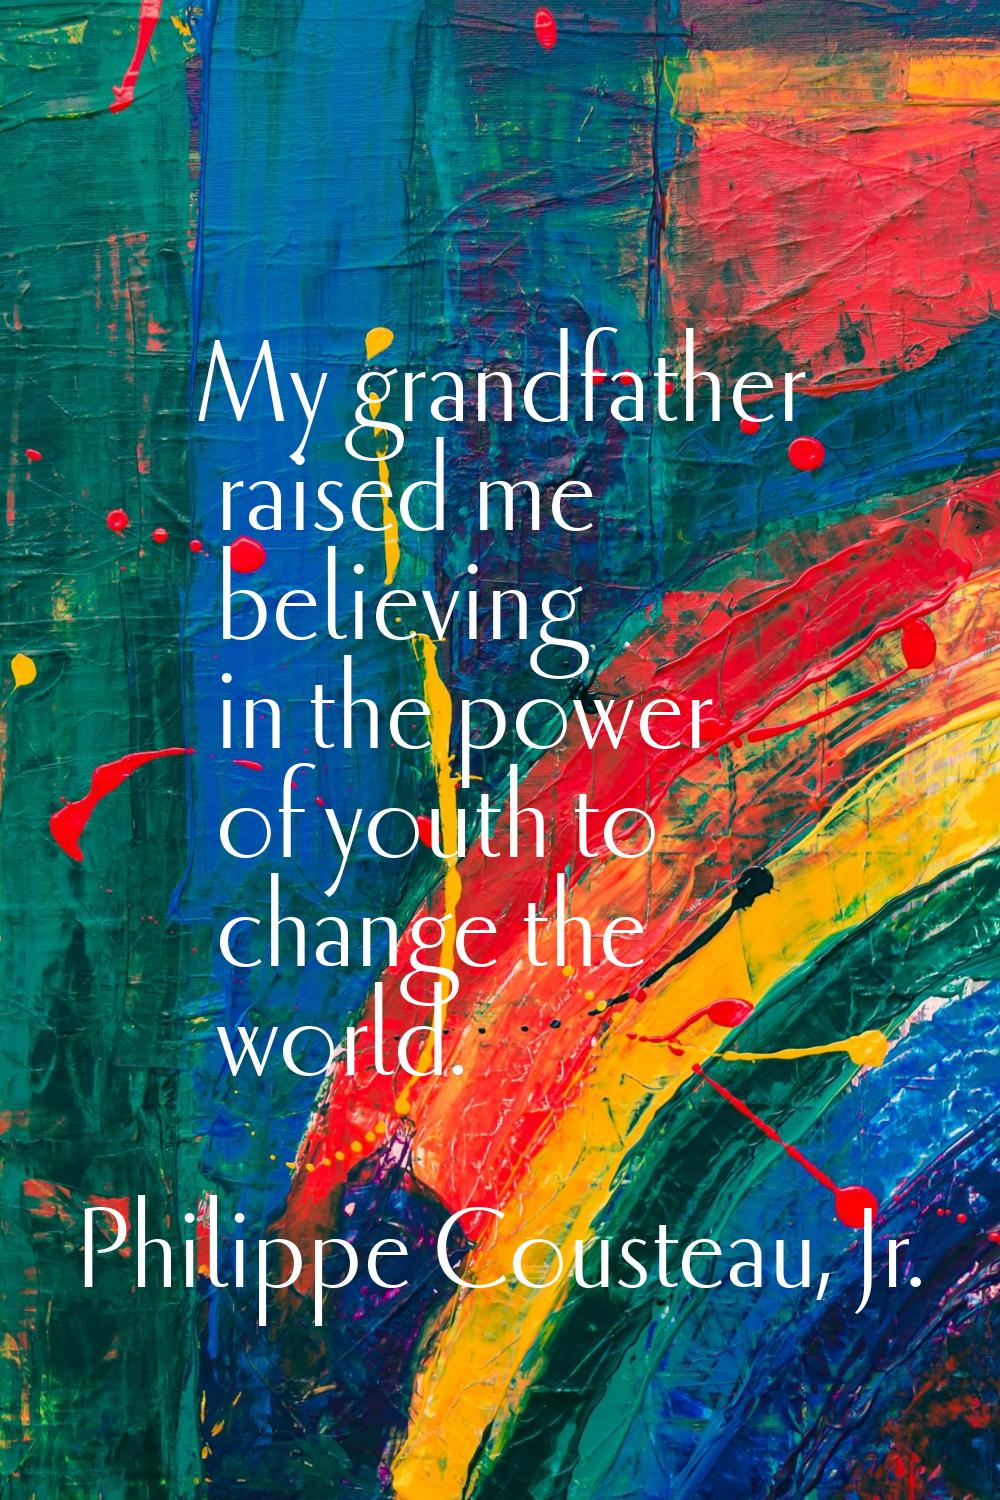 My grandfather raised me believing in the power of youth to change the world.